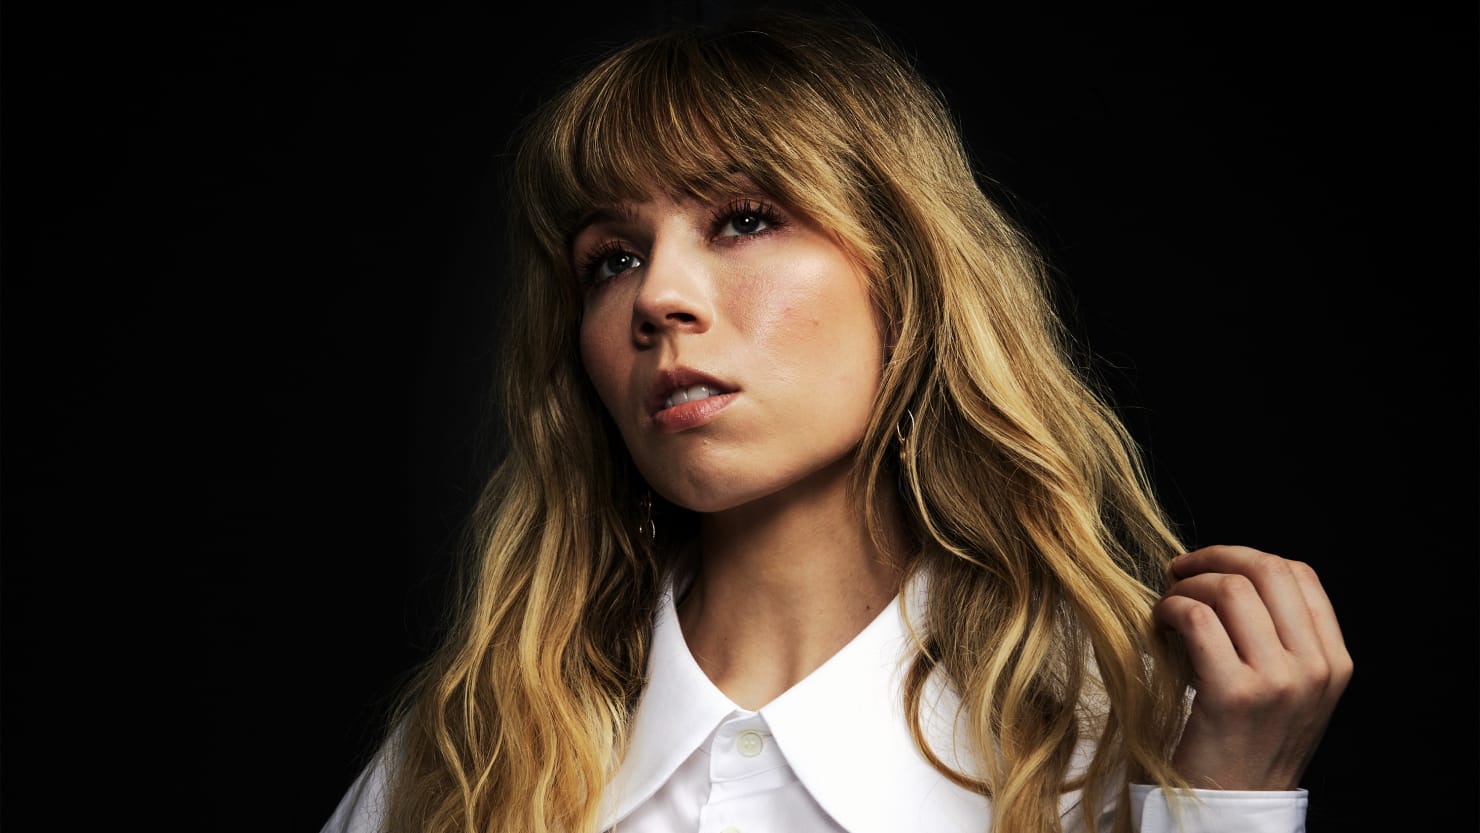 Nickelodeon Star Jennette McCurdy’s Memoir Isn’t a Juicy Child Star Tell-All. It’s Better.